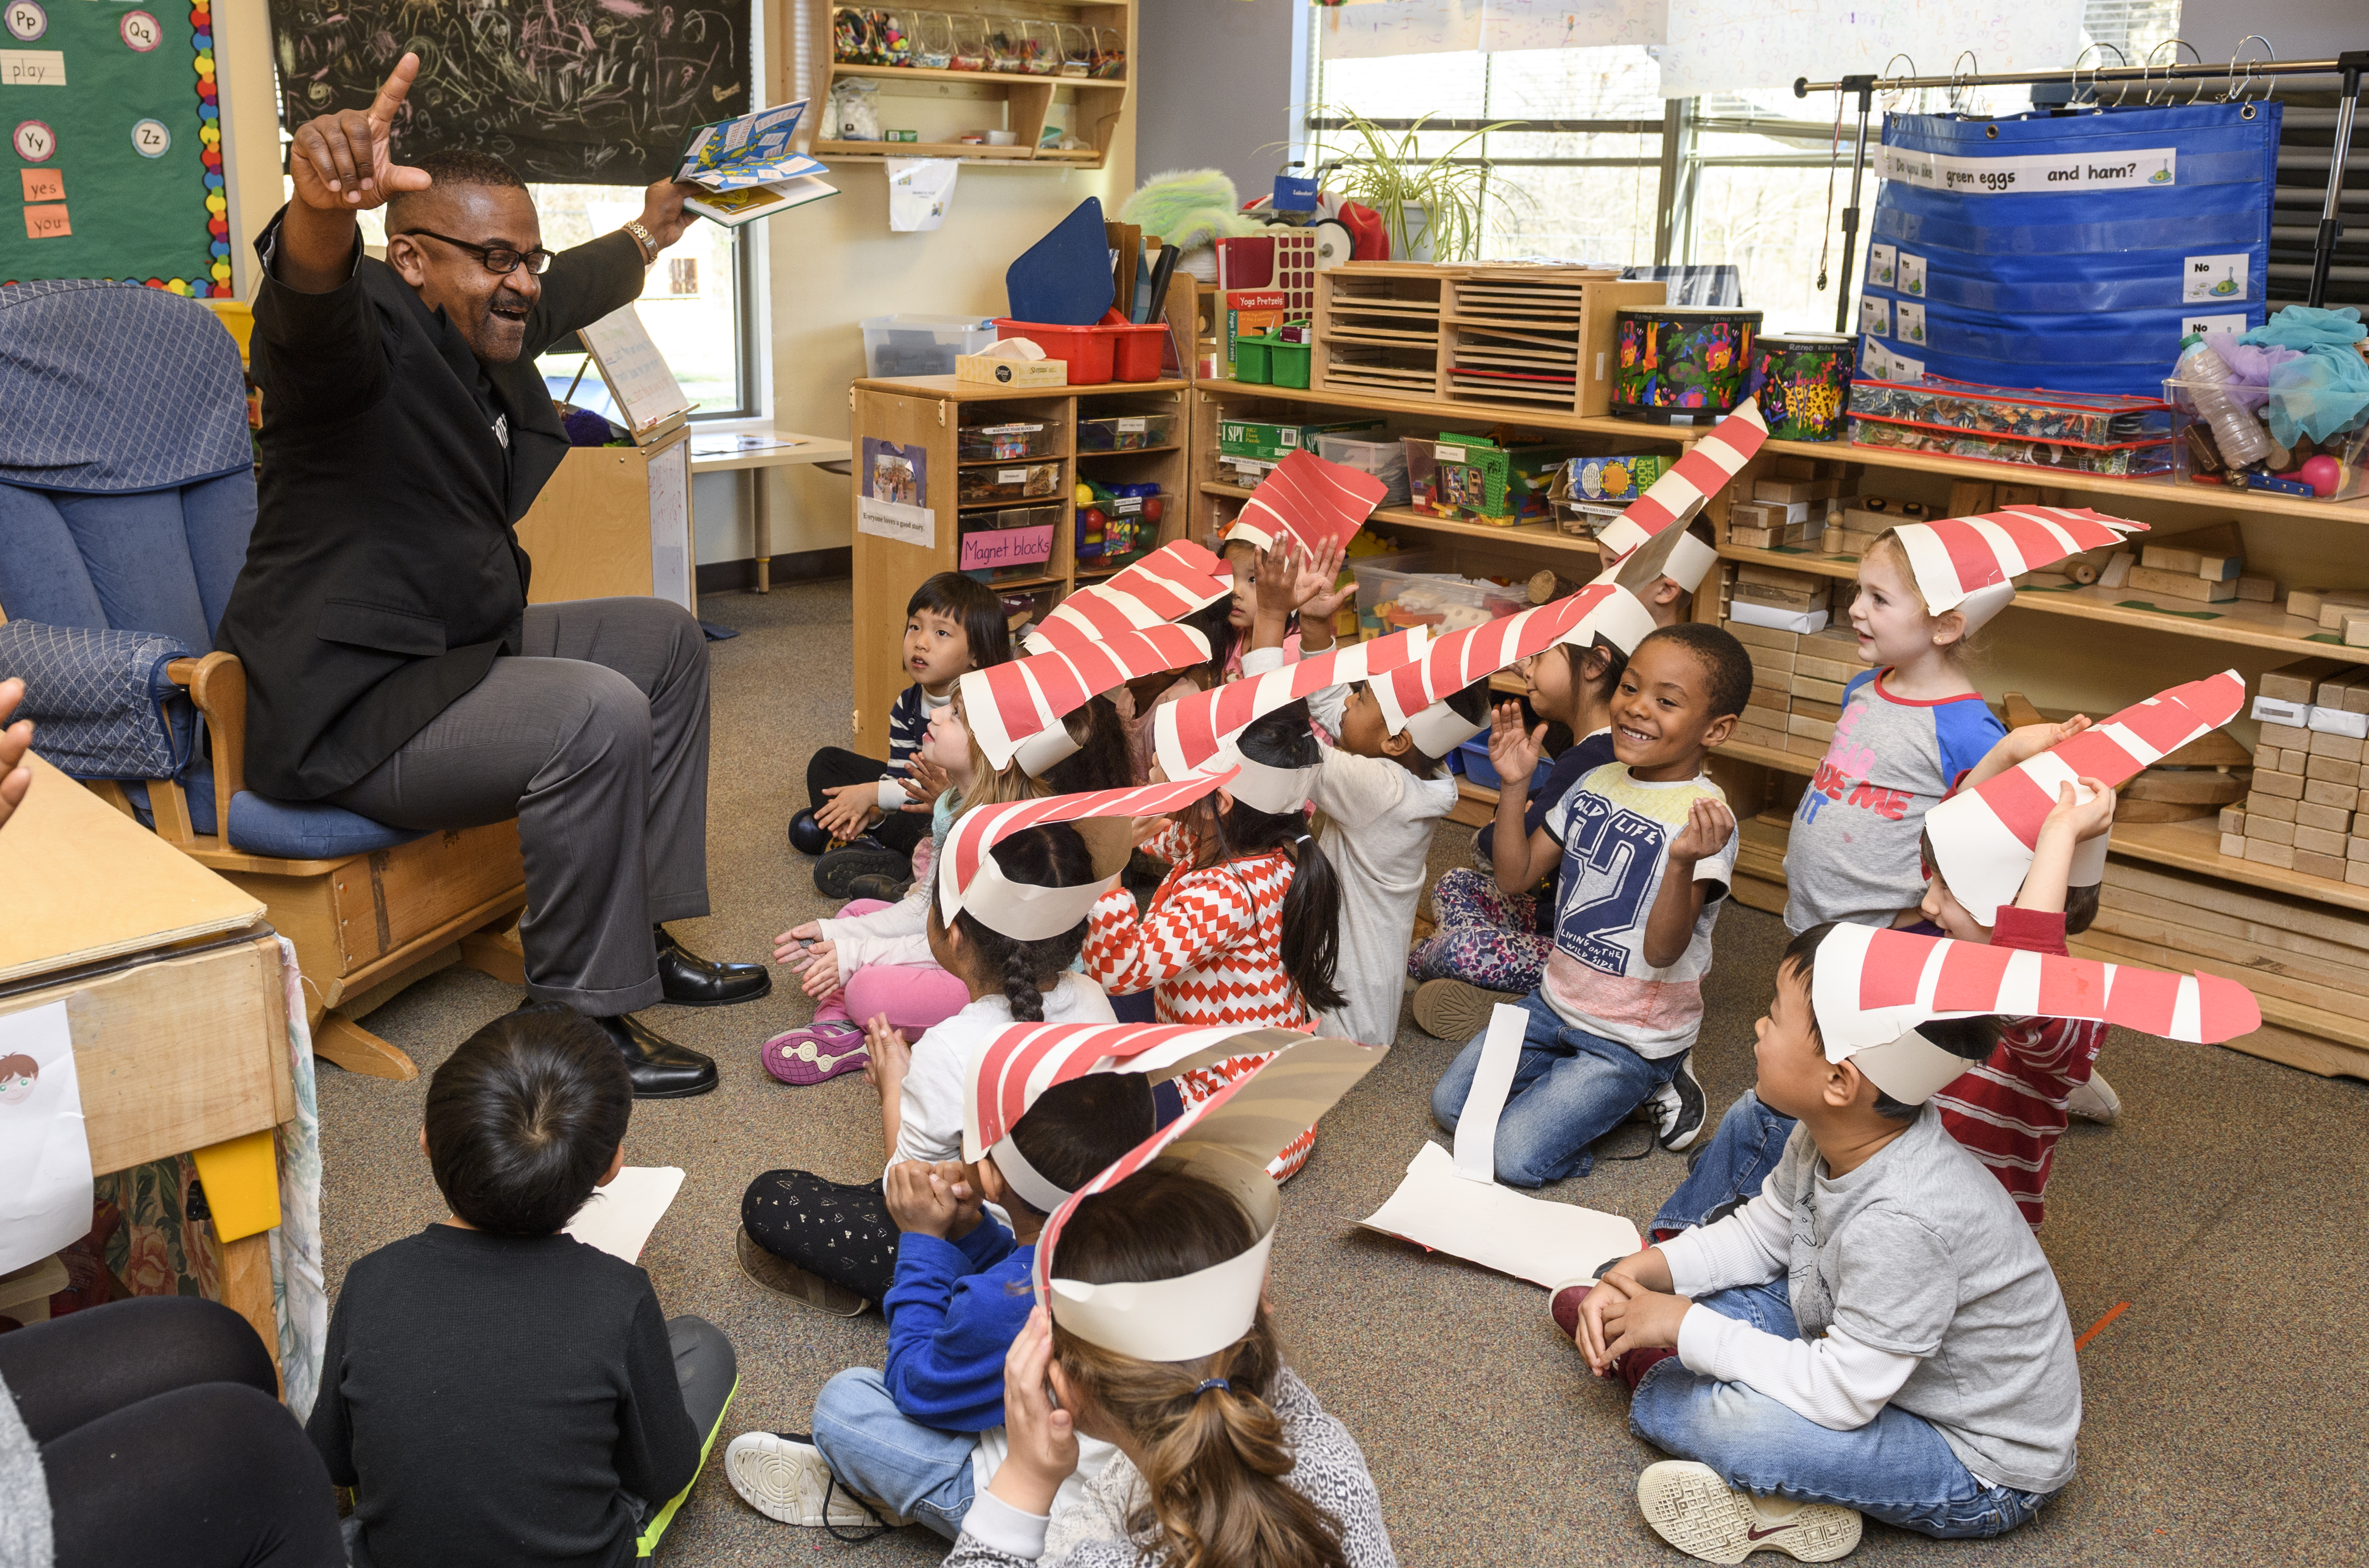 United Way's John Moore provides an energetic reading of a Dr. Seuss classic.